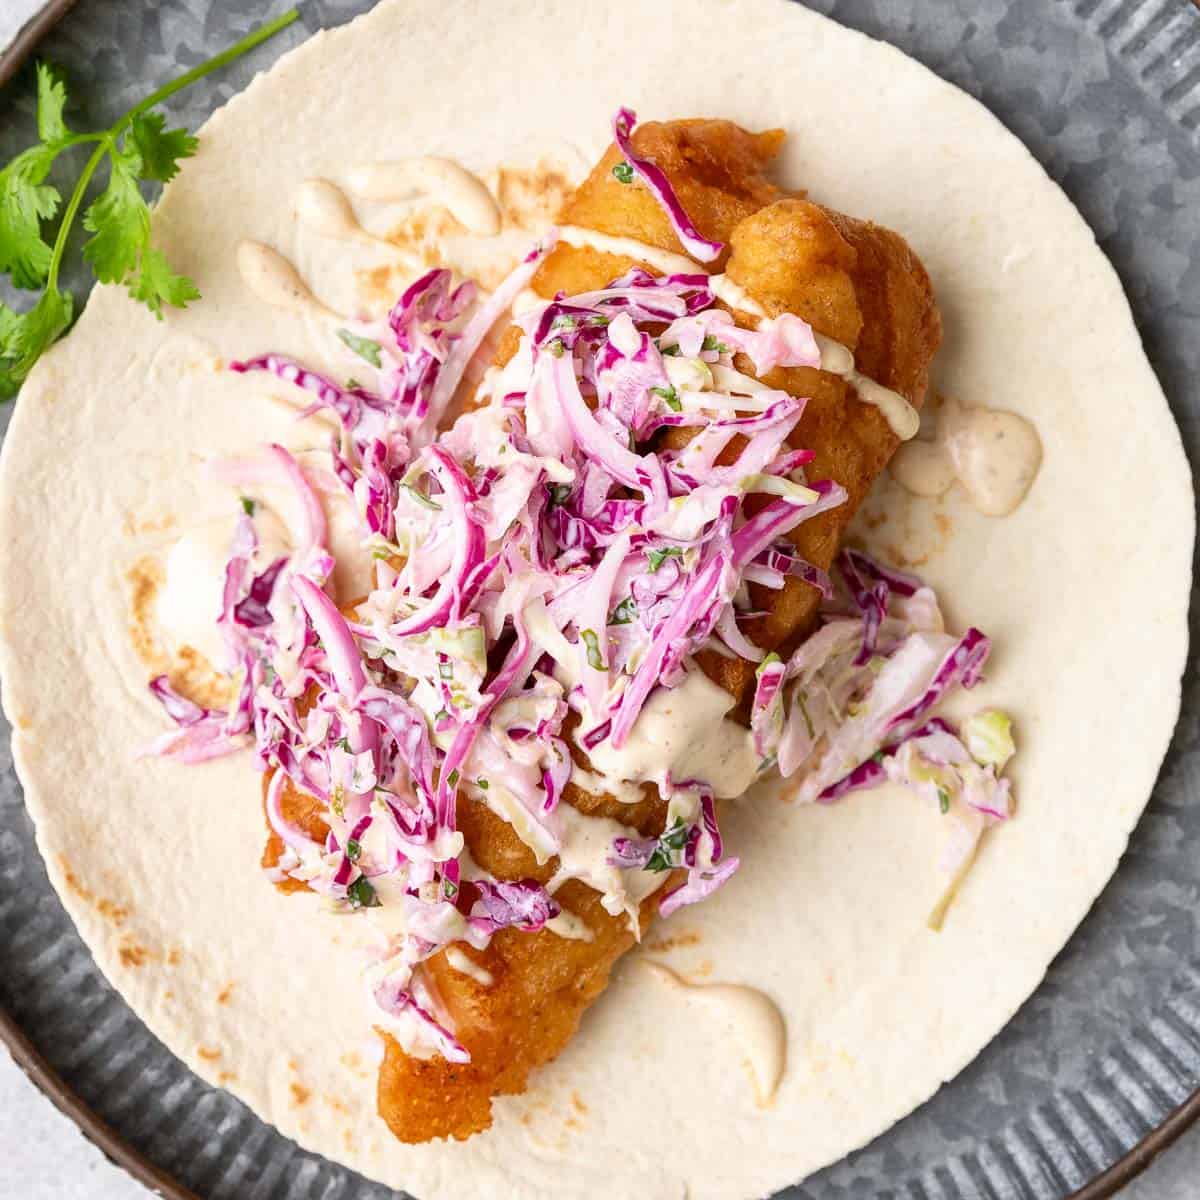 Close up view of an open faced beer battered cod taco.